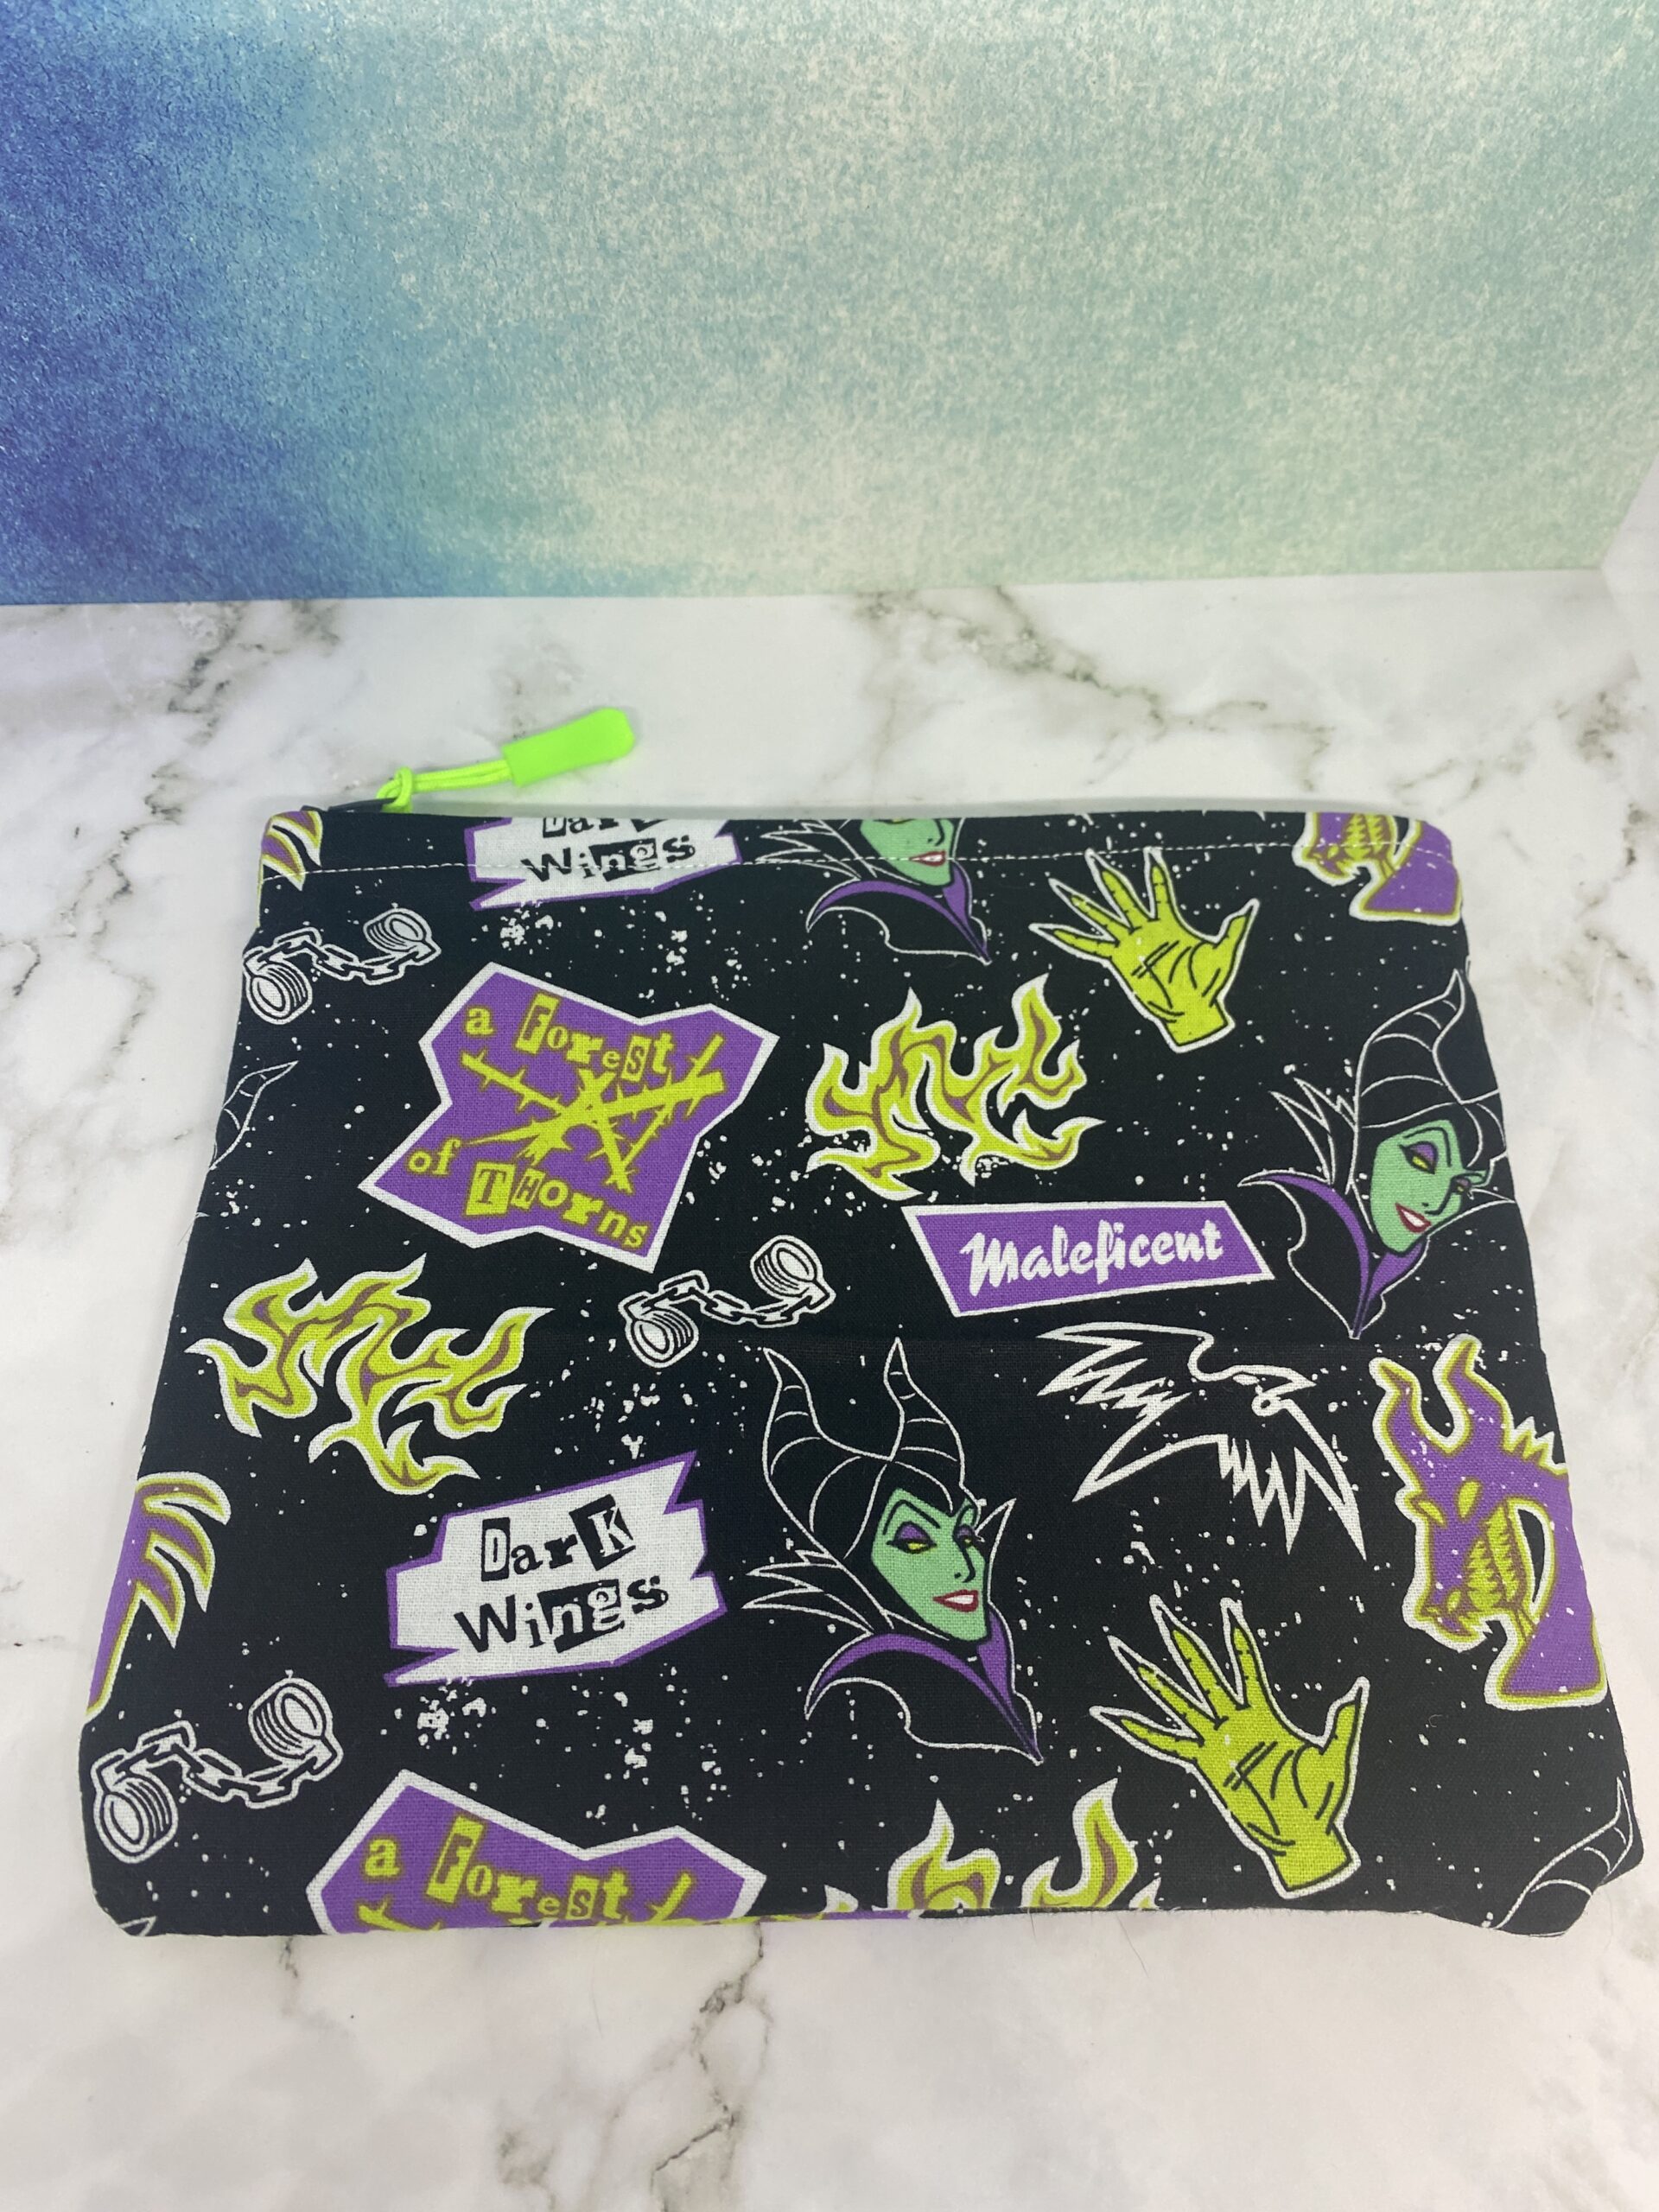 Maleficent Zipper Pouch is a zipper pouch with the villain Maleficent from Sleeping Beauty. #SleepingBeauty #Maleficent